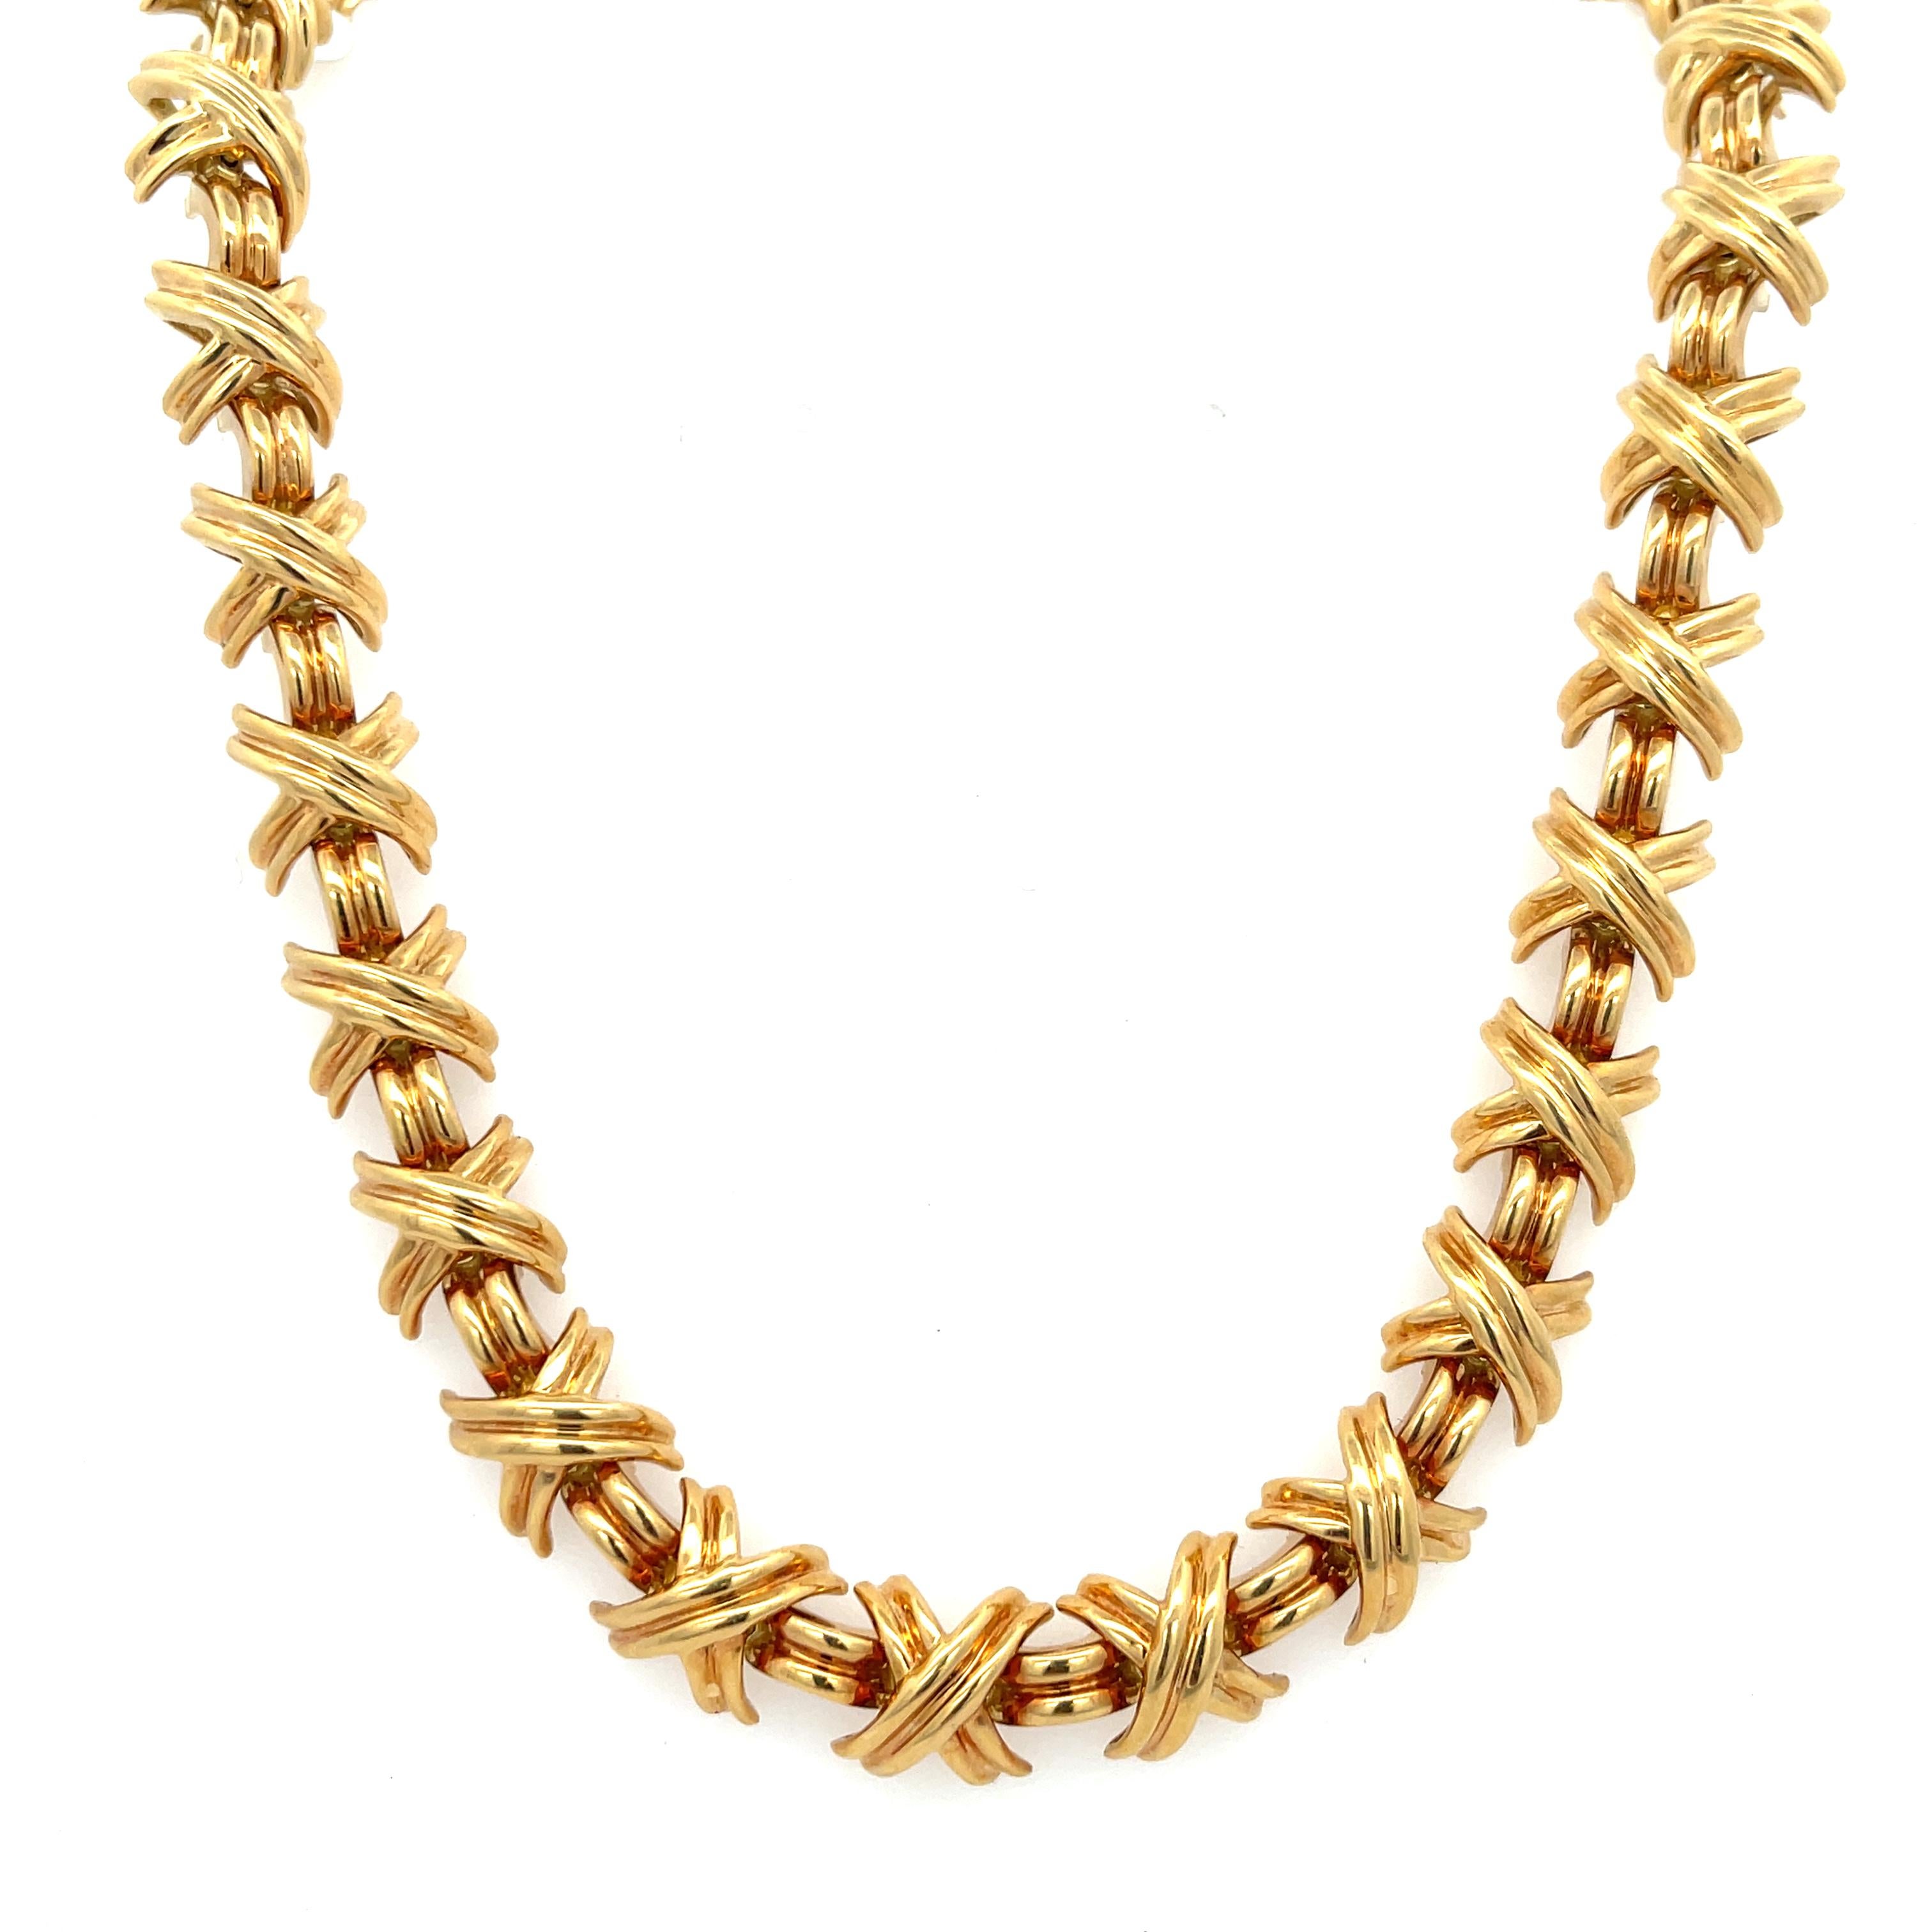 Estate Tiffany & Co. Large X Signature Collection Necklace in 18K Yellow Gold. The necklace is 16.5 inches long, 3/8 inch wide, and weighs 86.5 grams. Features an hidden clasp with safety latch. Singed T&CO 750.